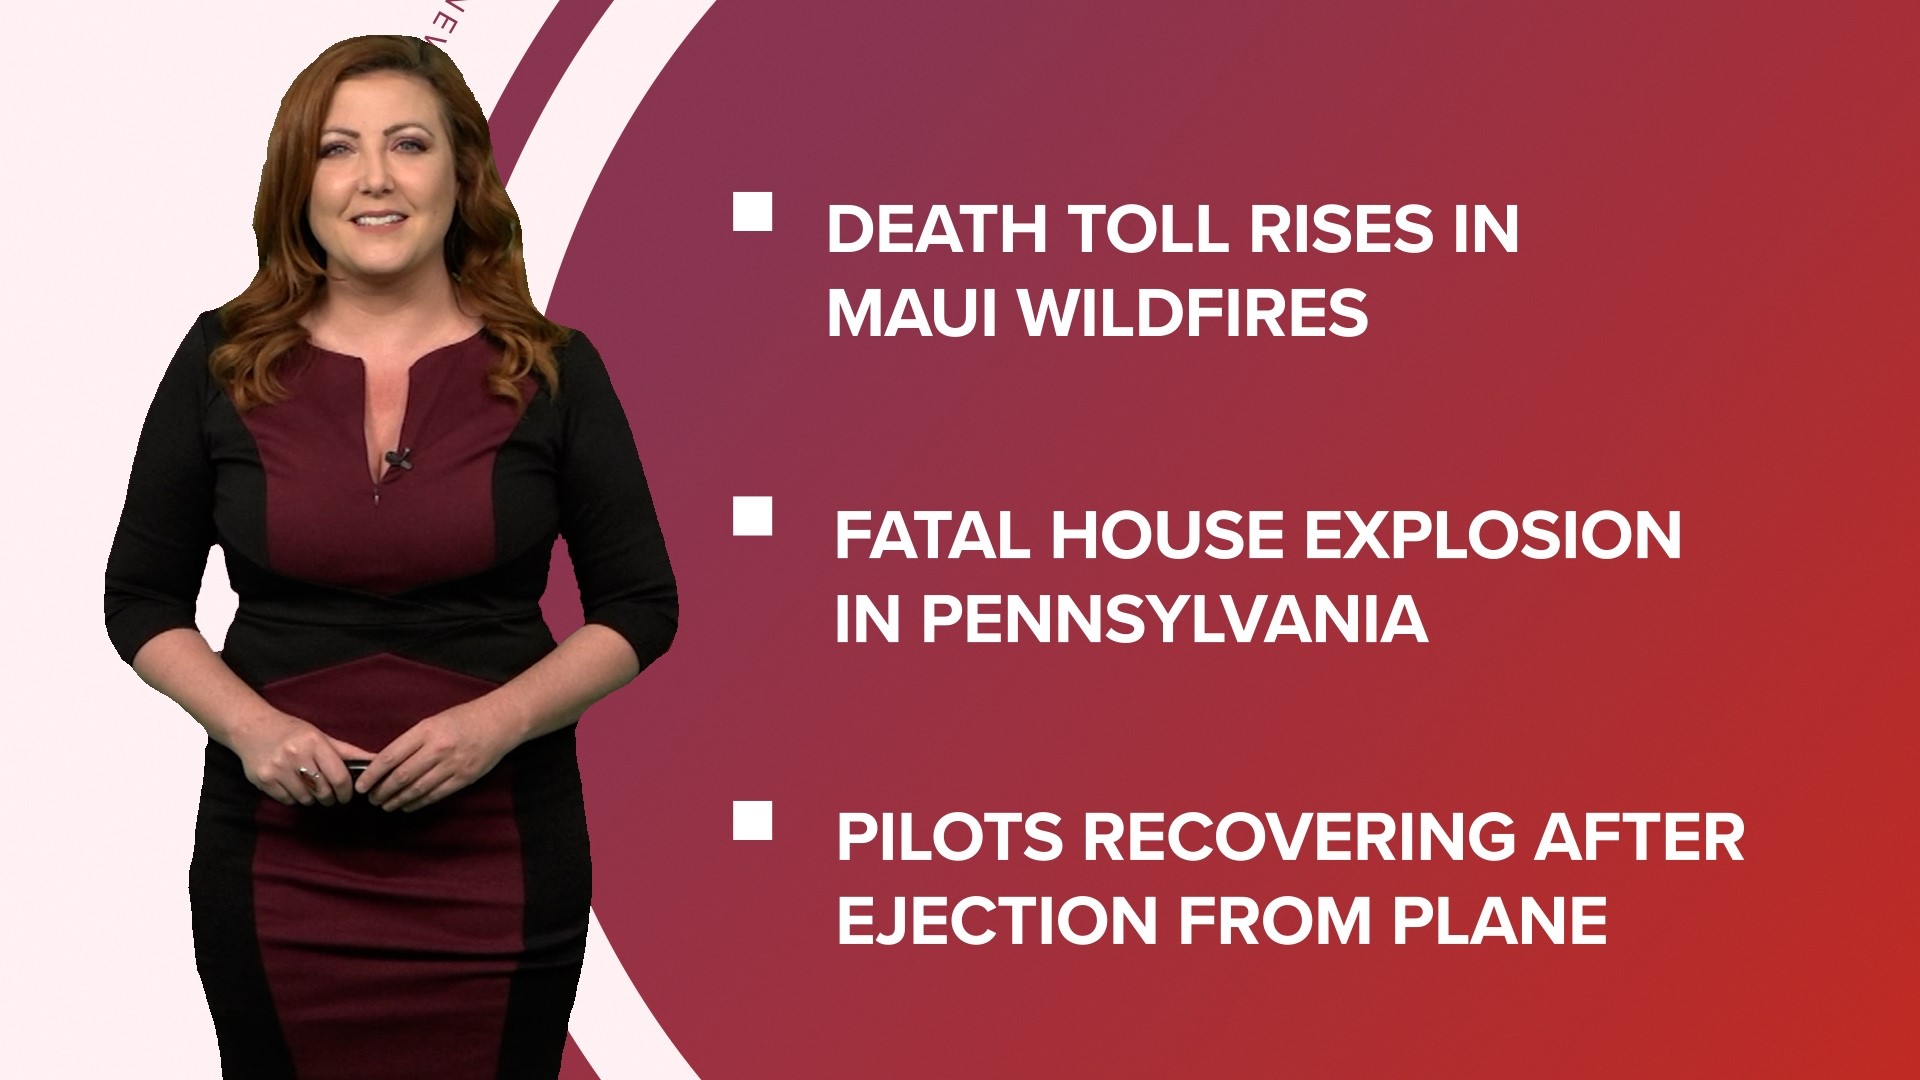 A look at what is happening in the news from the rising death toll from the Maui wildfires to a fatal house explosion in Pennsylvania and Ed Sheeran surprises fans.